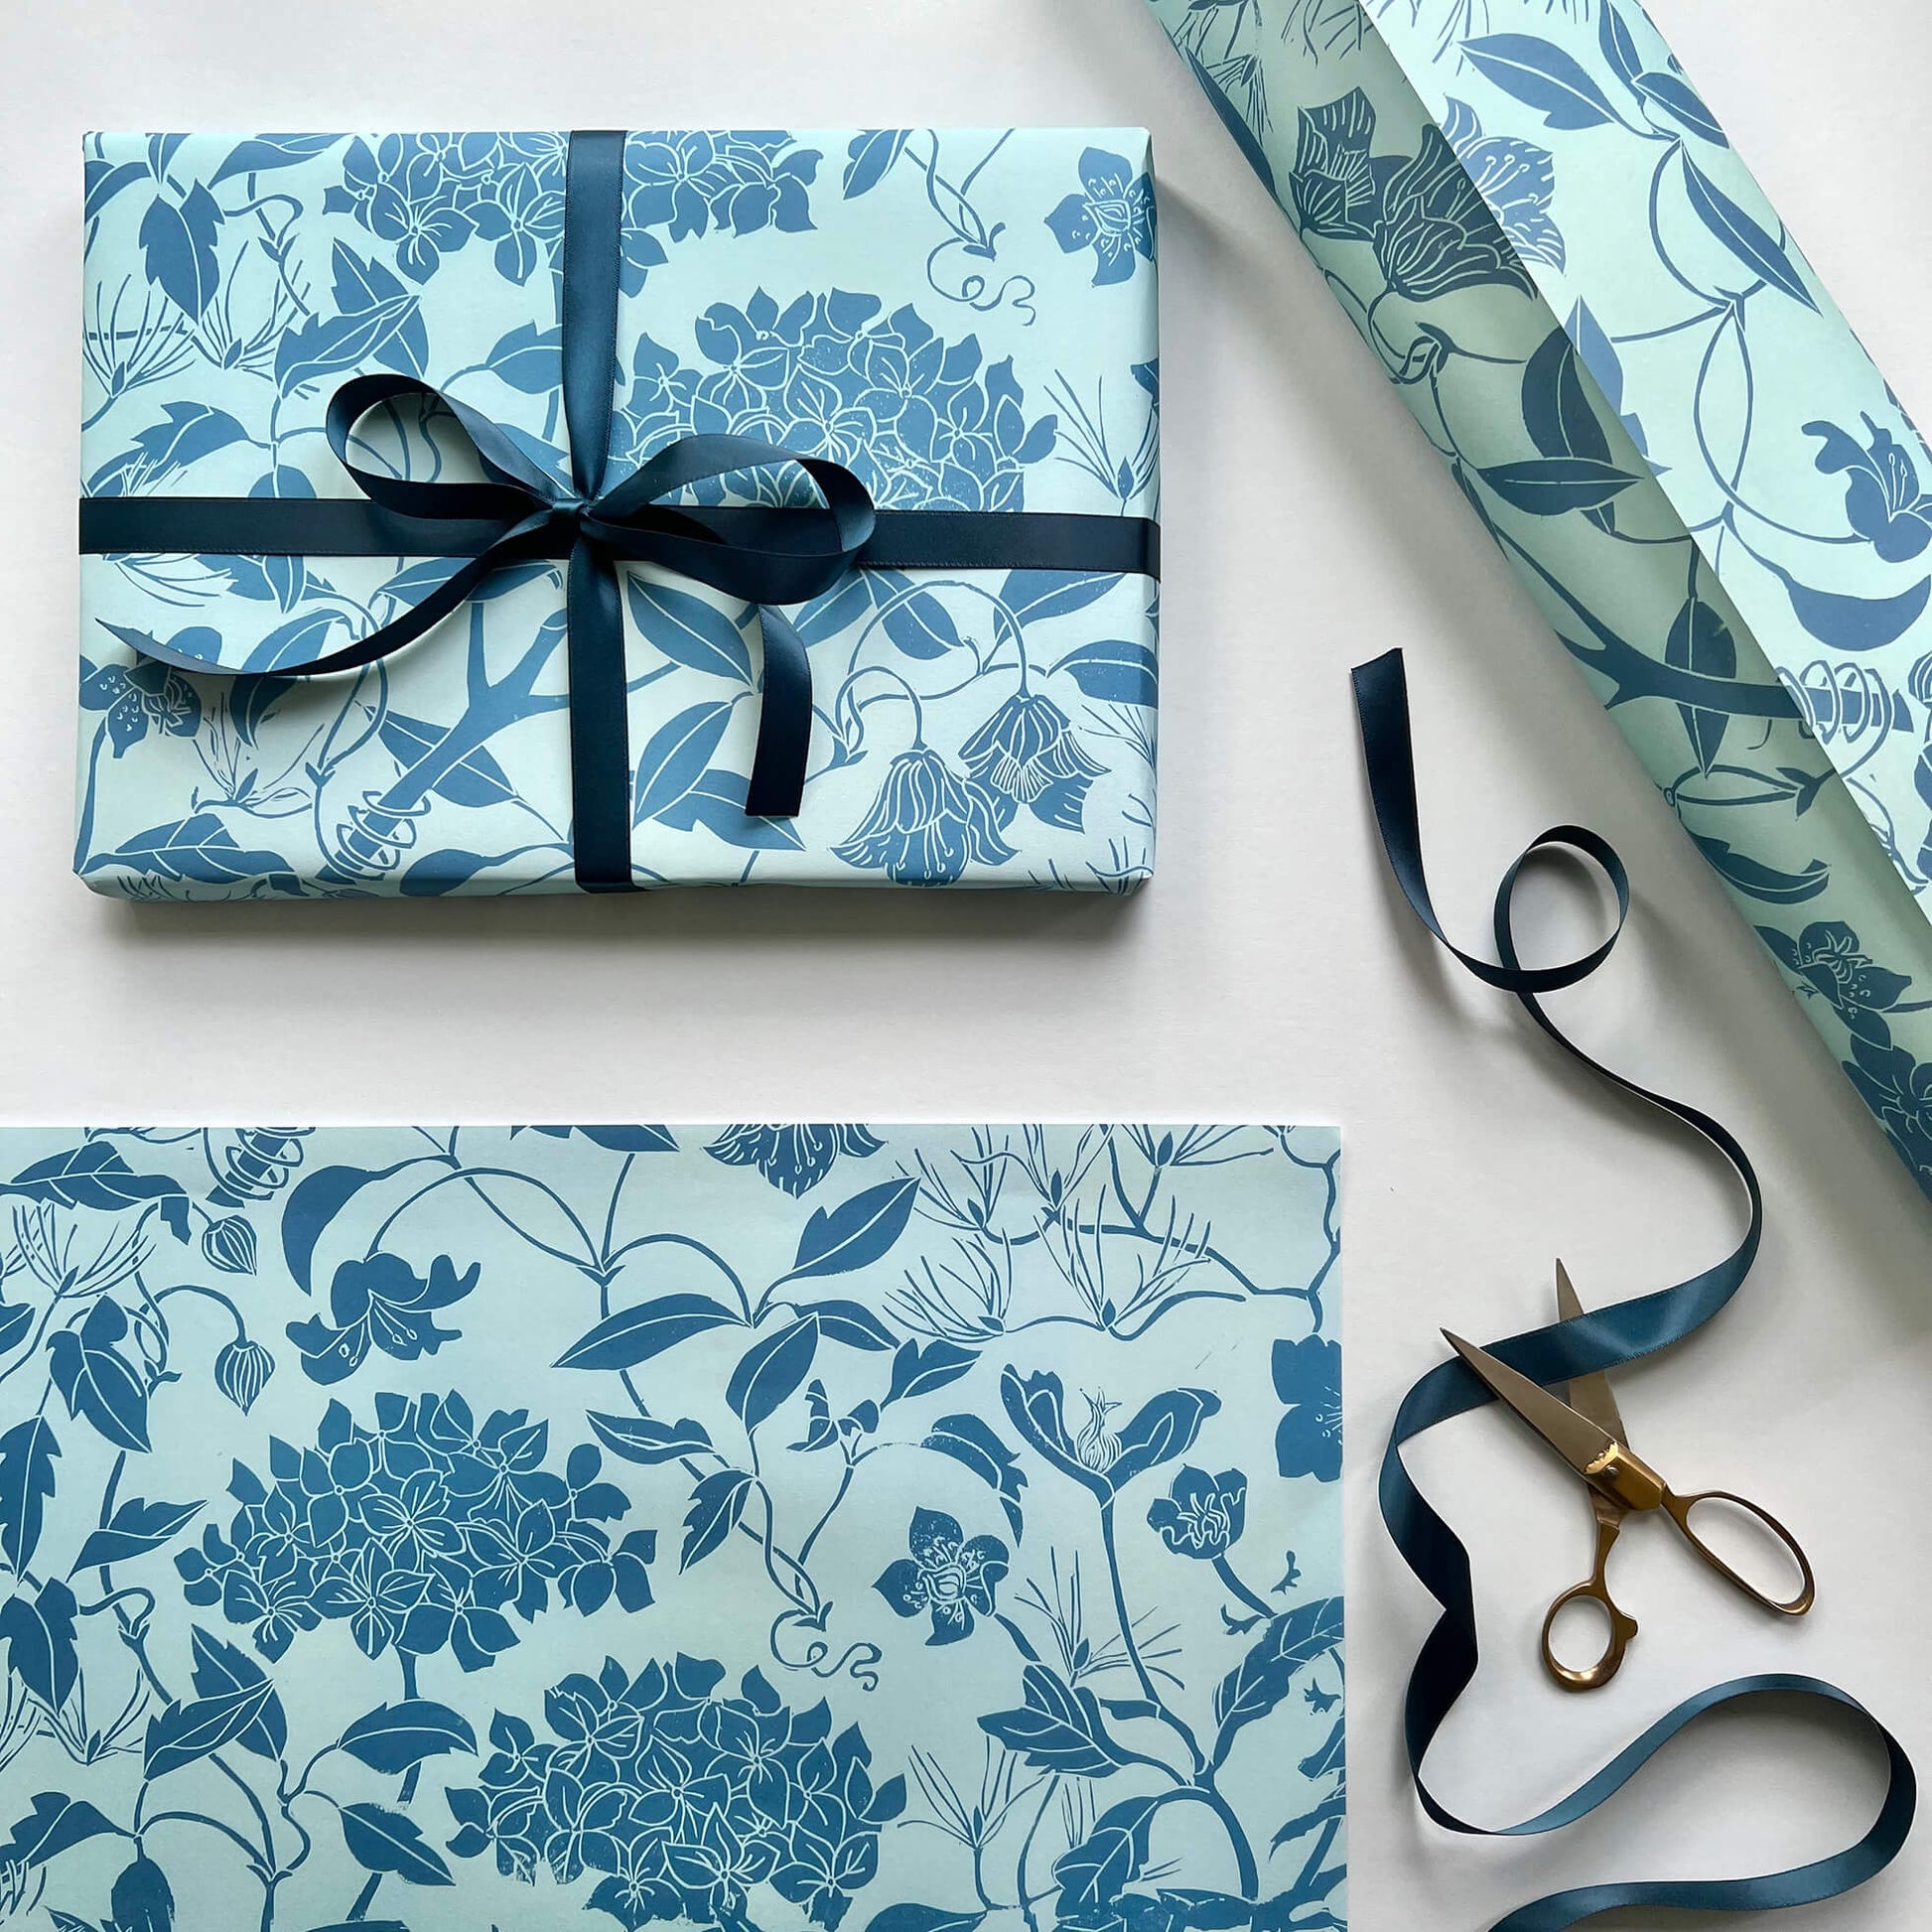 Laura Sowerby's Linocut print gift wrap featuring garden plants including hydrangea and clematis